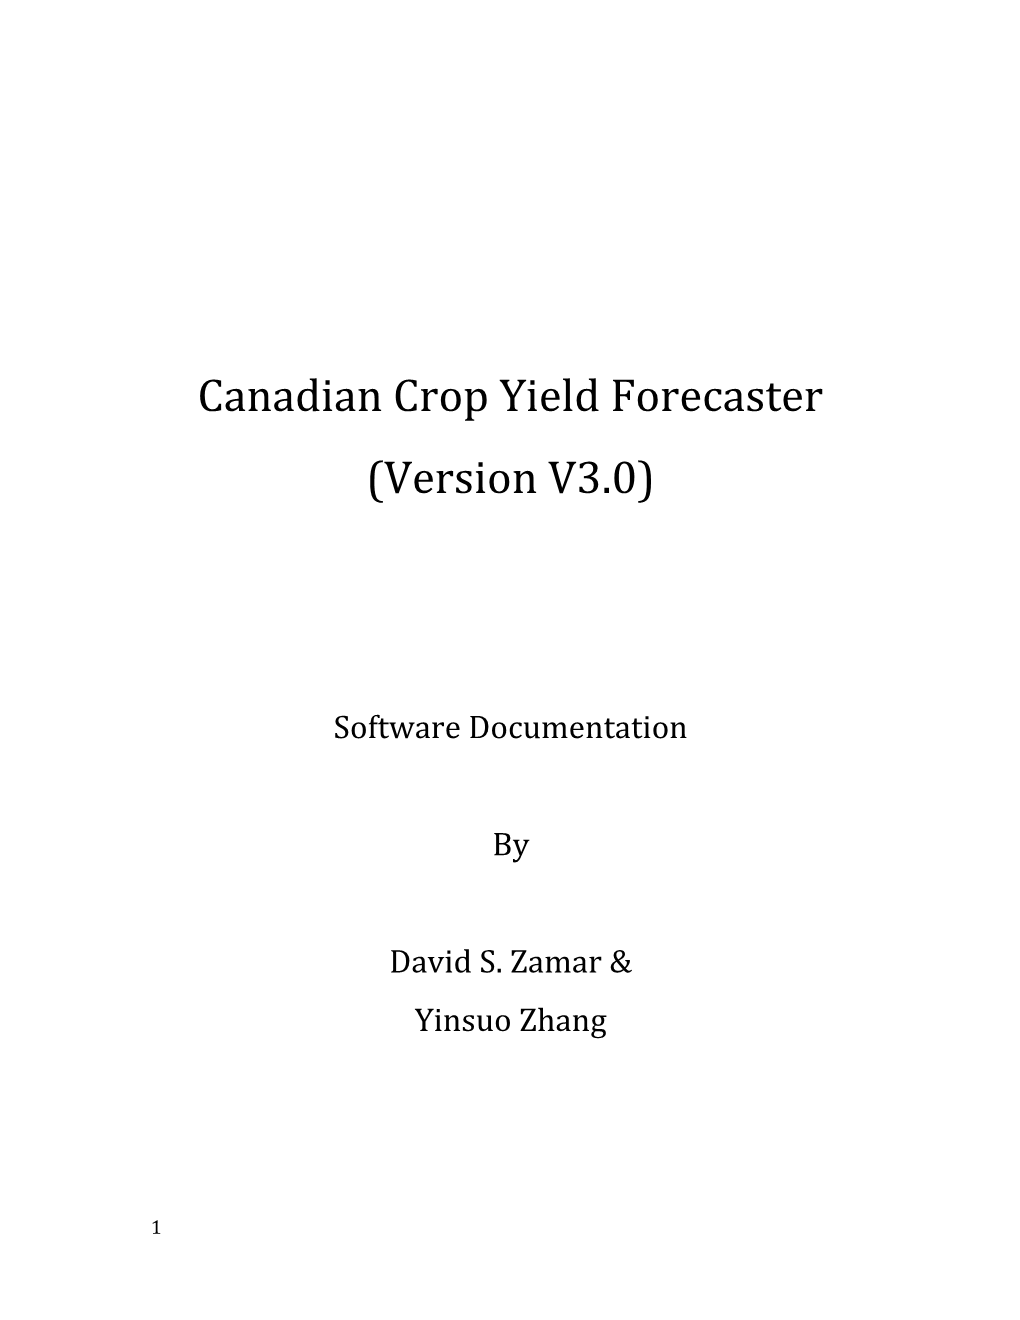 Canadian Crop Yield Forecaster